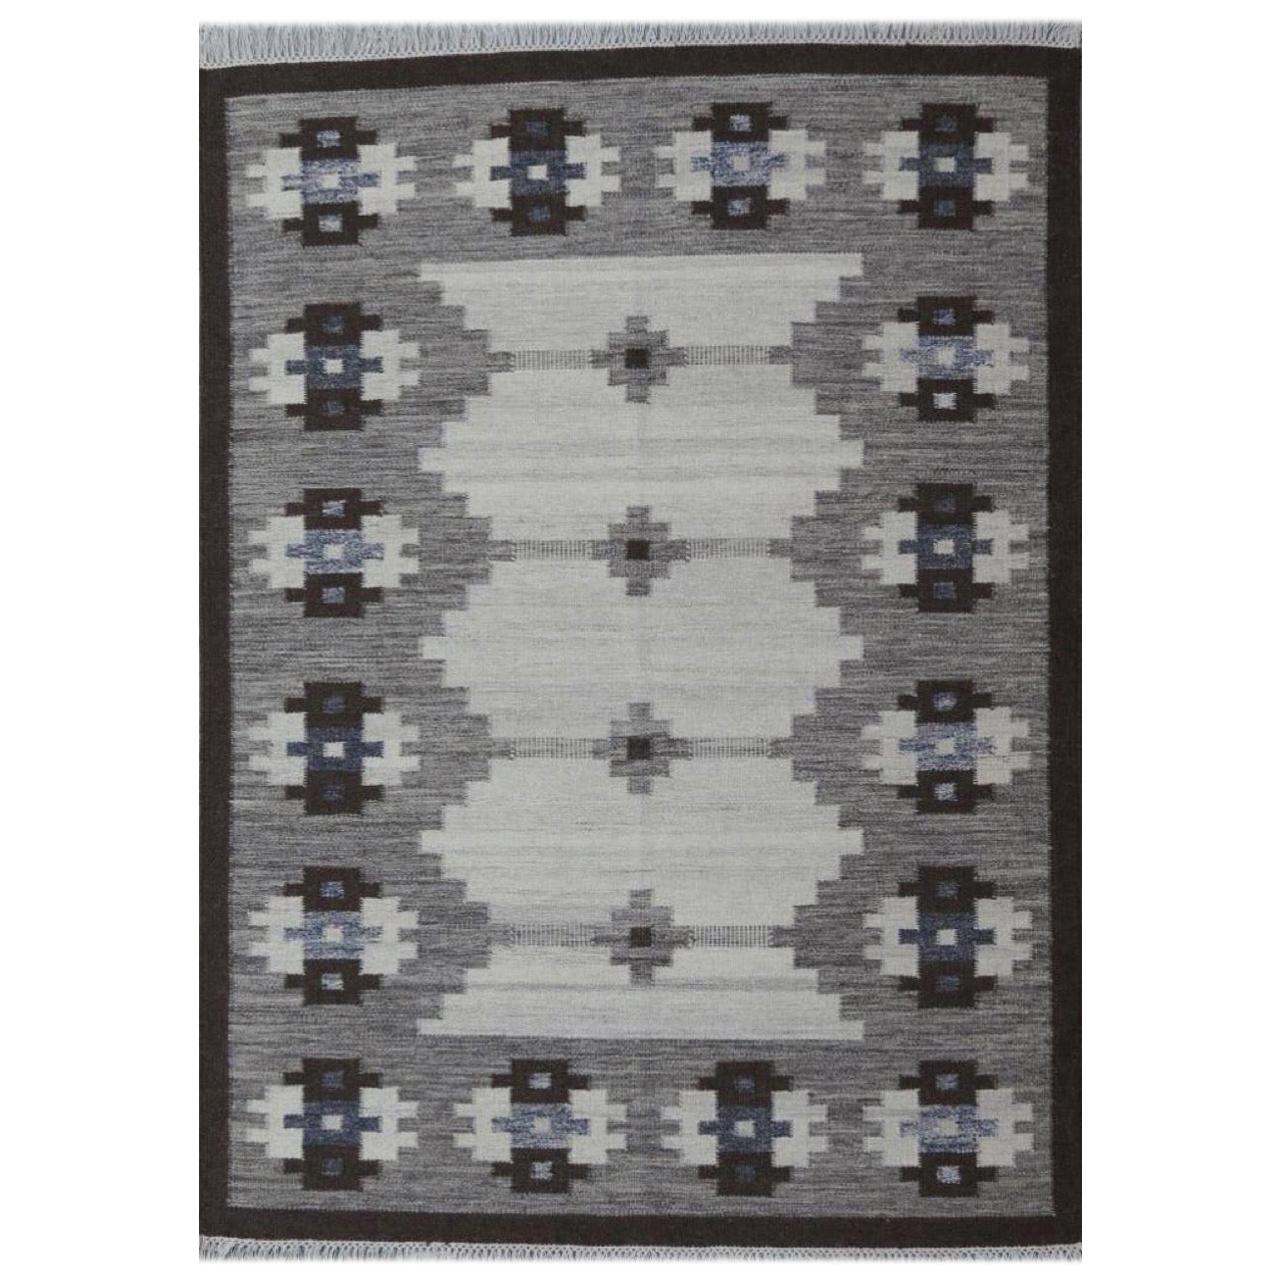 New Scandinavian Design Handwoven Flat Rug Kilim size: 6ft 6in x 9ft 10in For Sale